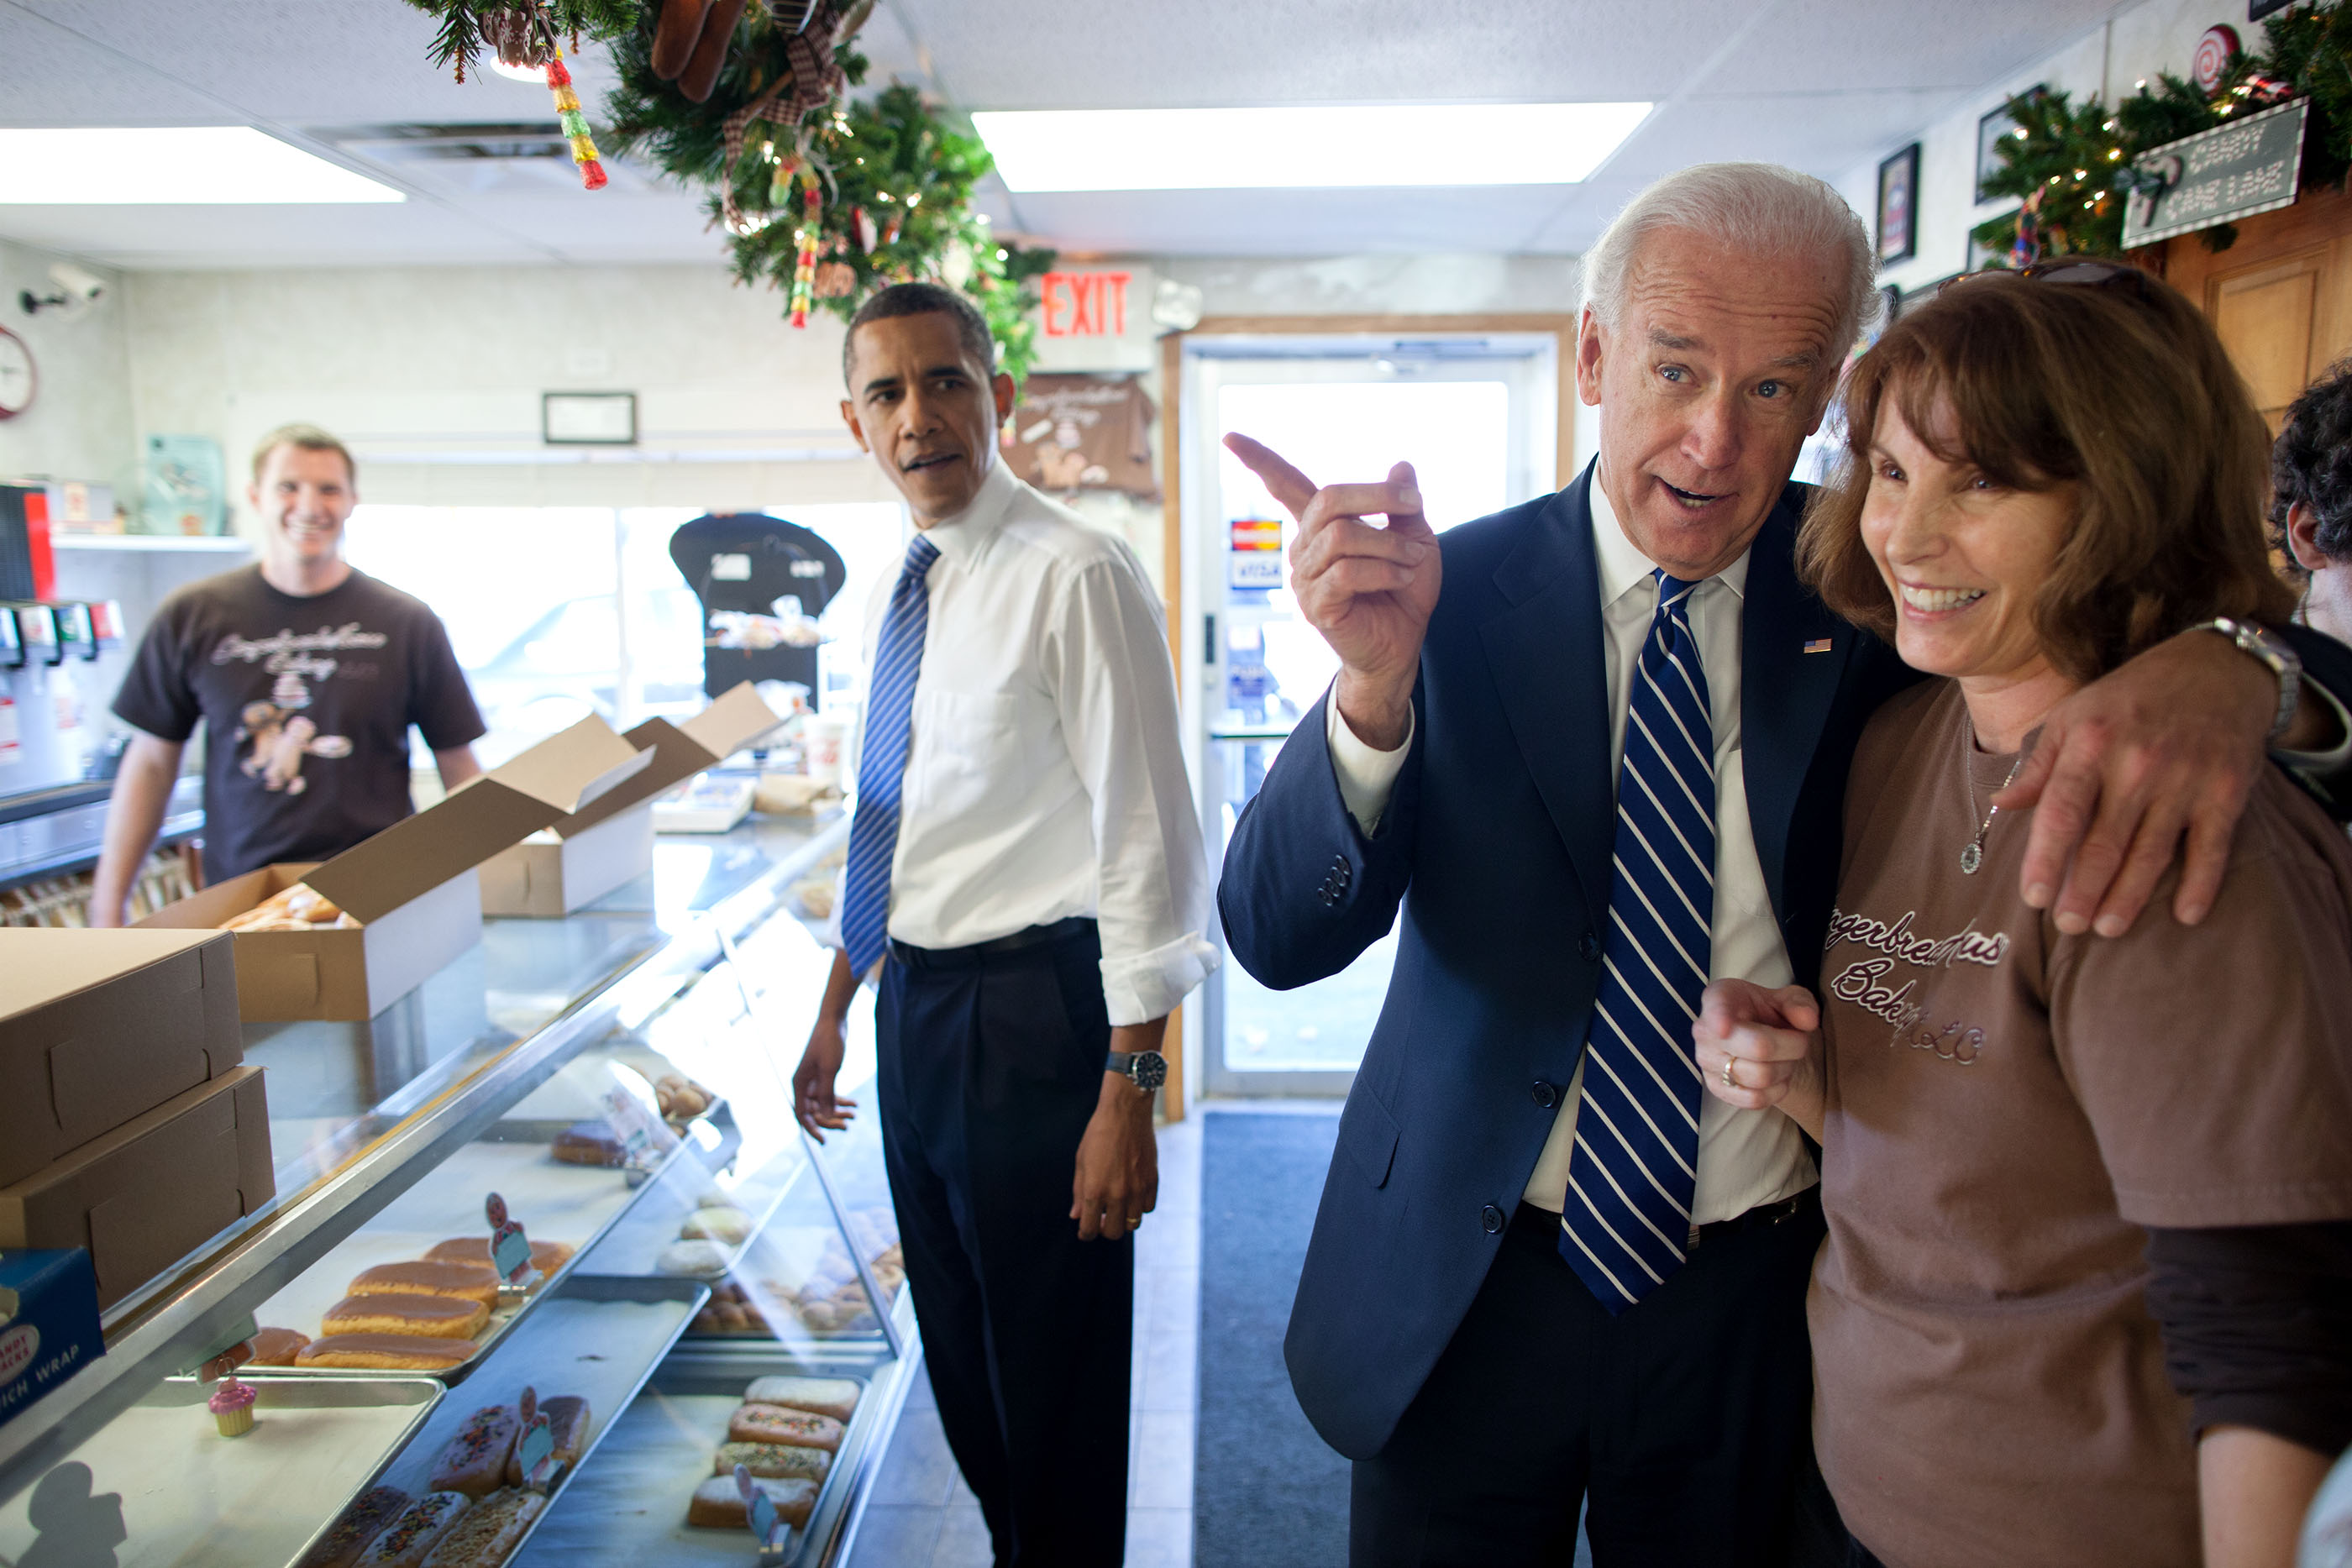 Indiana, Nov. 23, 2010. Dropping by the Gingerbread House Bakery in Kokomo with the Vice President. (Official White House Photo by Pete Souza)